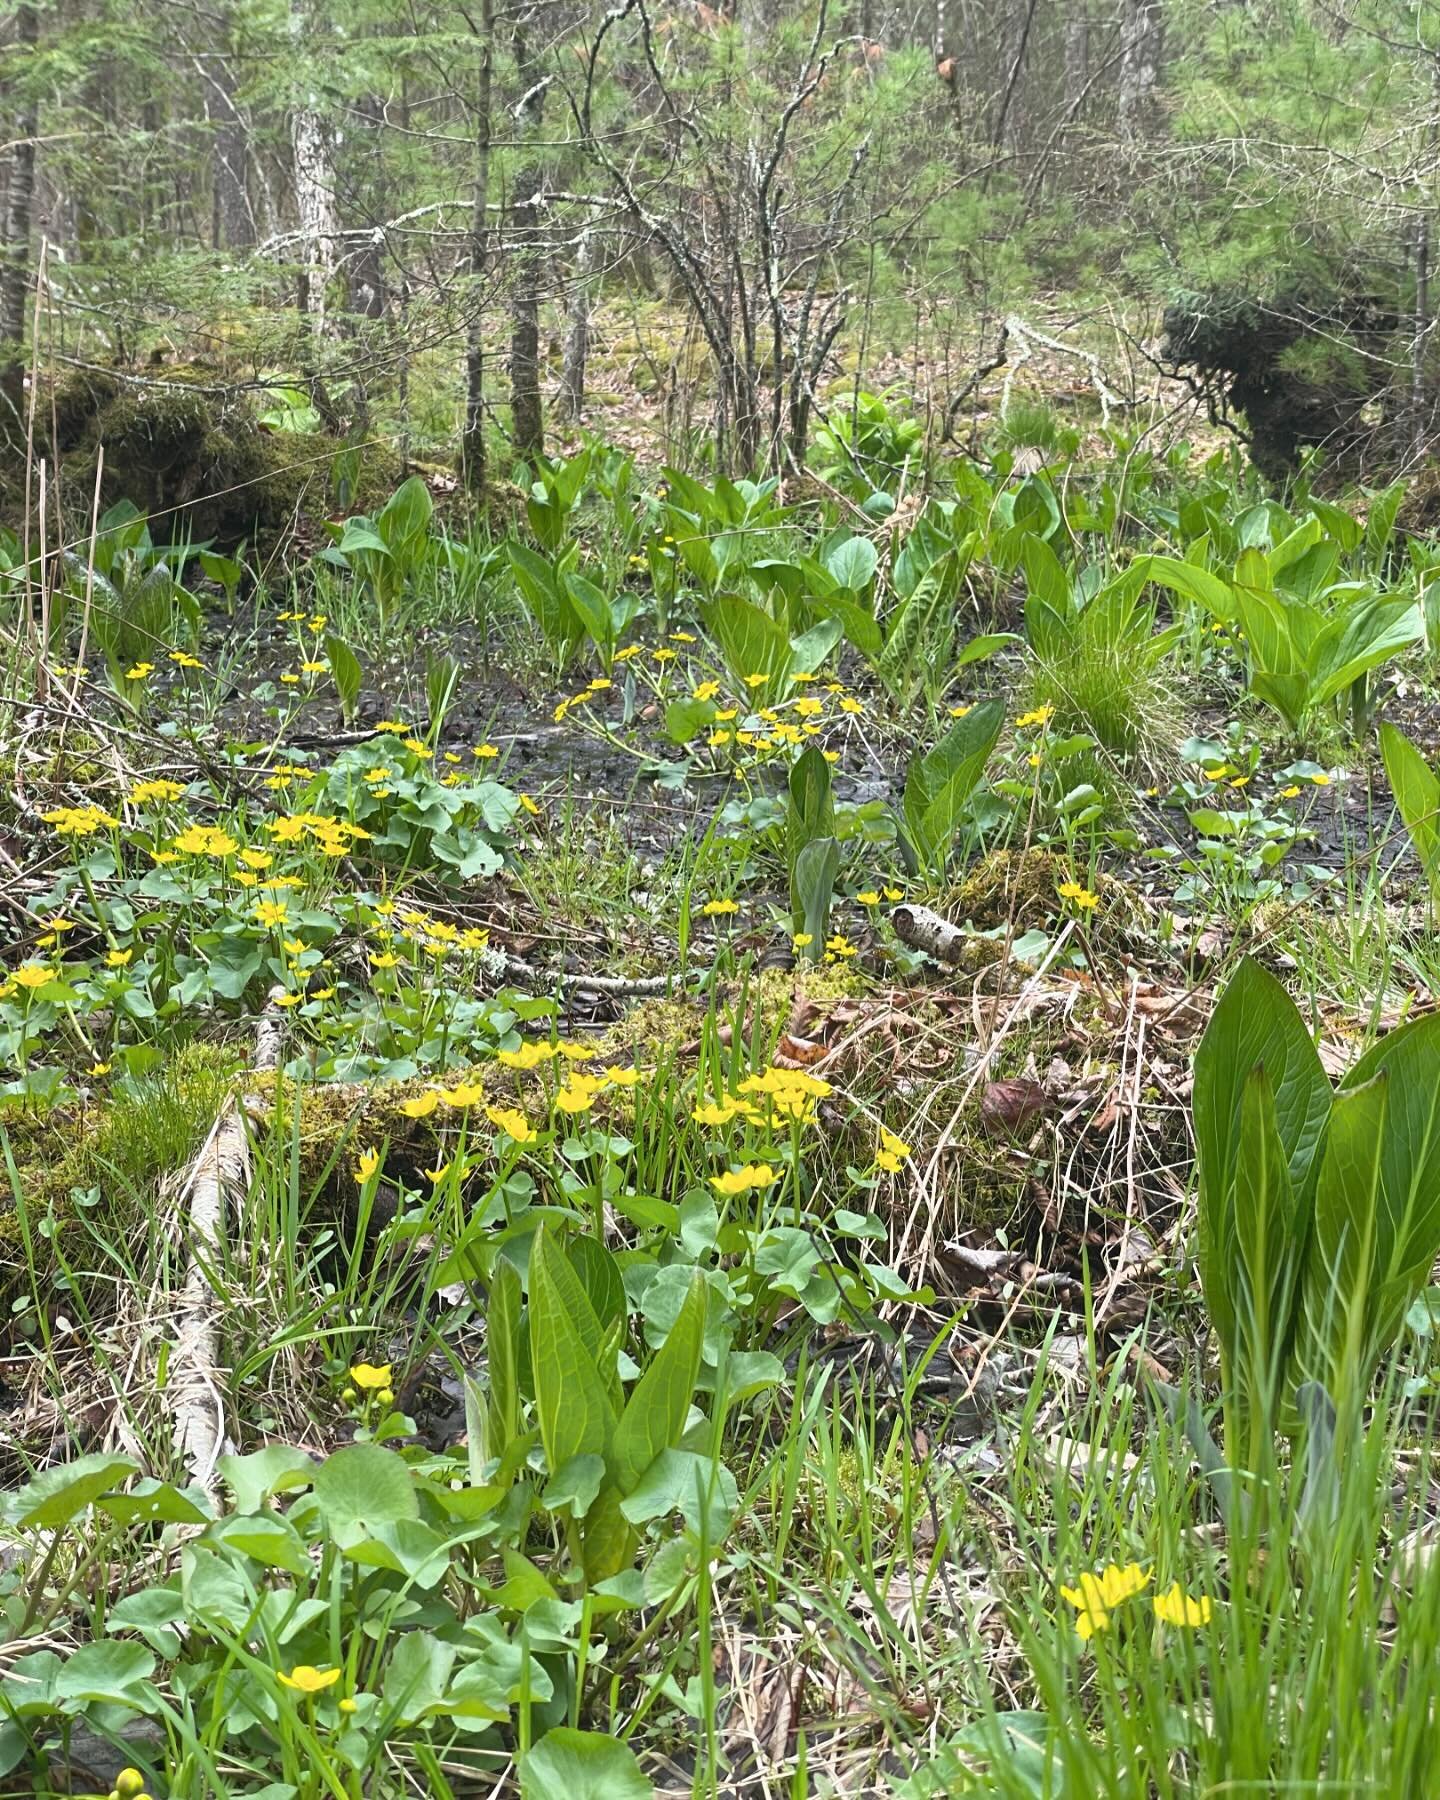 This journey was well-worth almost being consumed by the bog 🧙&zwj;♀️while Alyssa happily waited in the 🚙. An ode to the flowering and non-flowering plants of sphagnum moss-dominated wetlands! 

🌼Marsh Marigold&rsquo;s showy golden blooms pull the